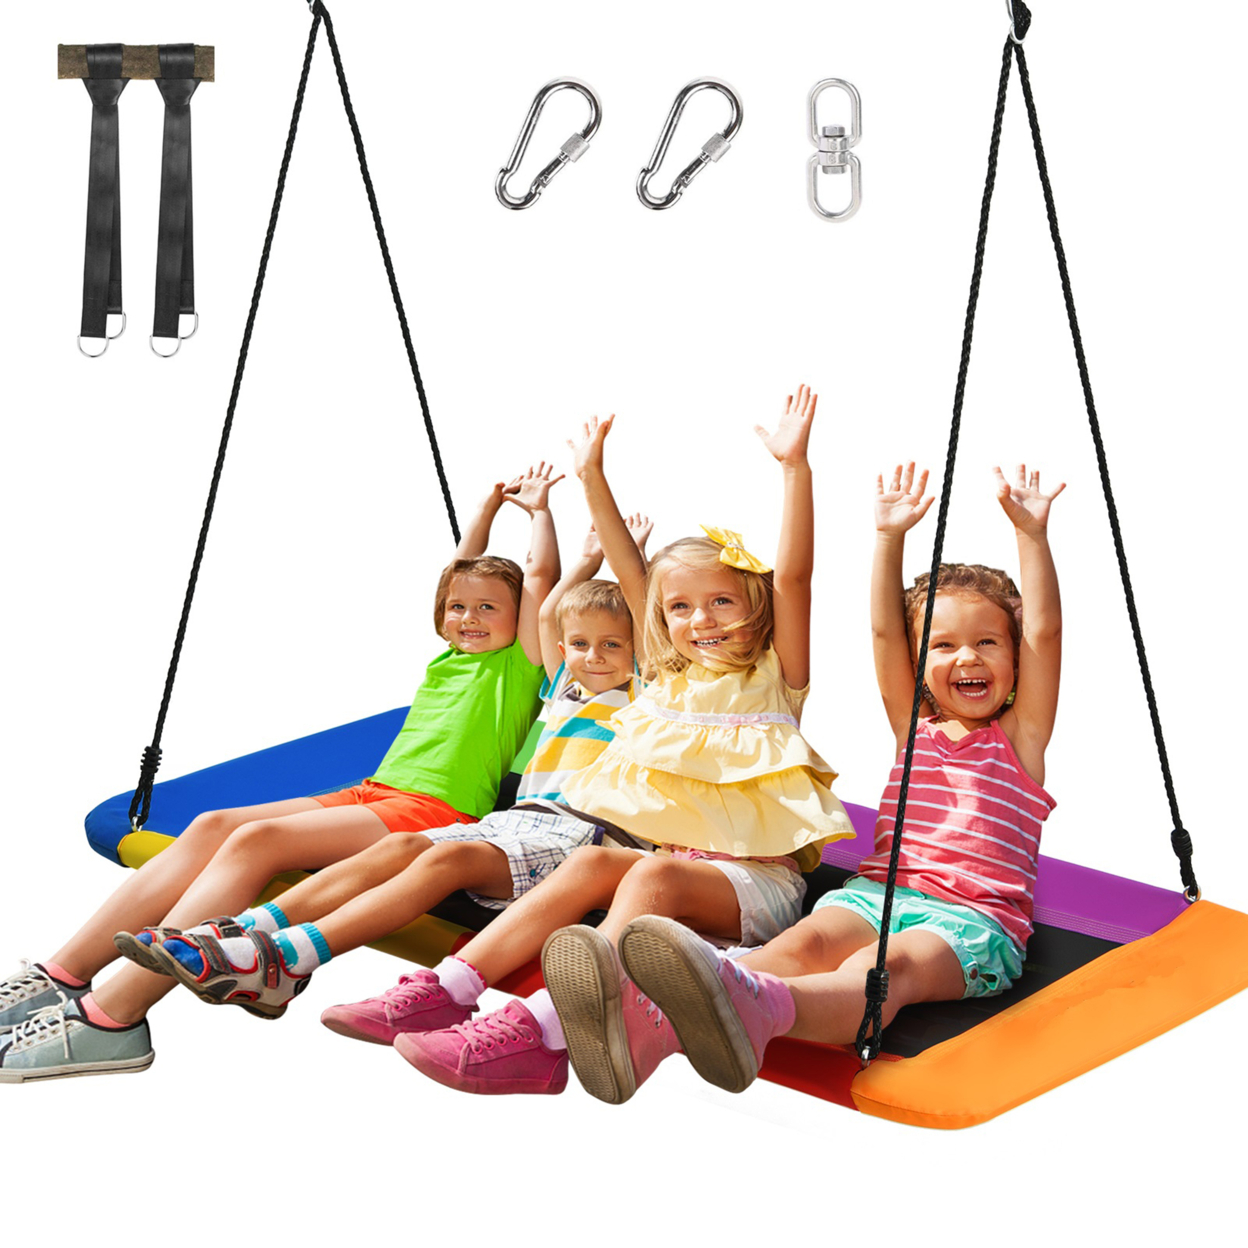 60'' Kids Giant Tree Rectangle Swing 700 Lbs W/ Adjustable Hanging Ropes - Multi-color